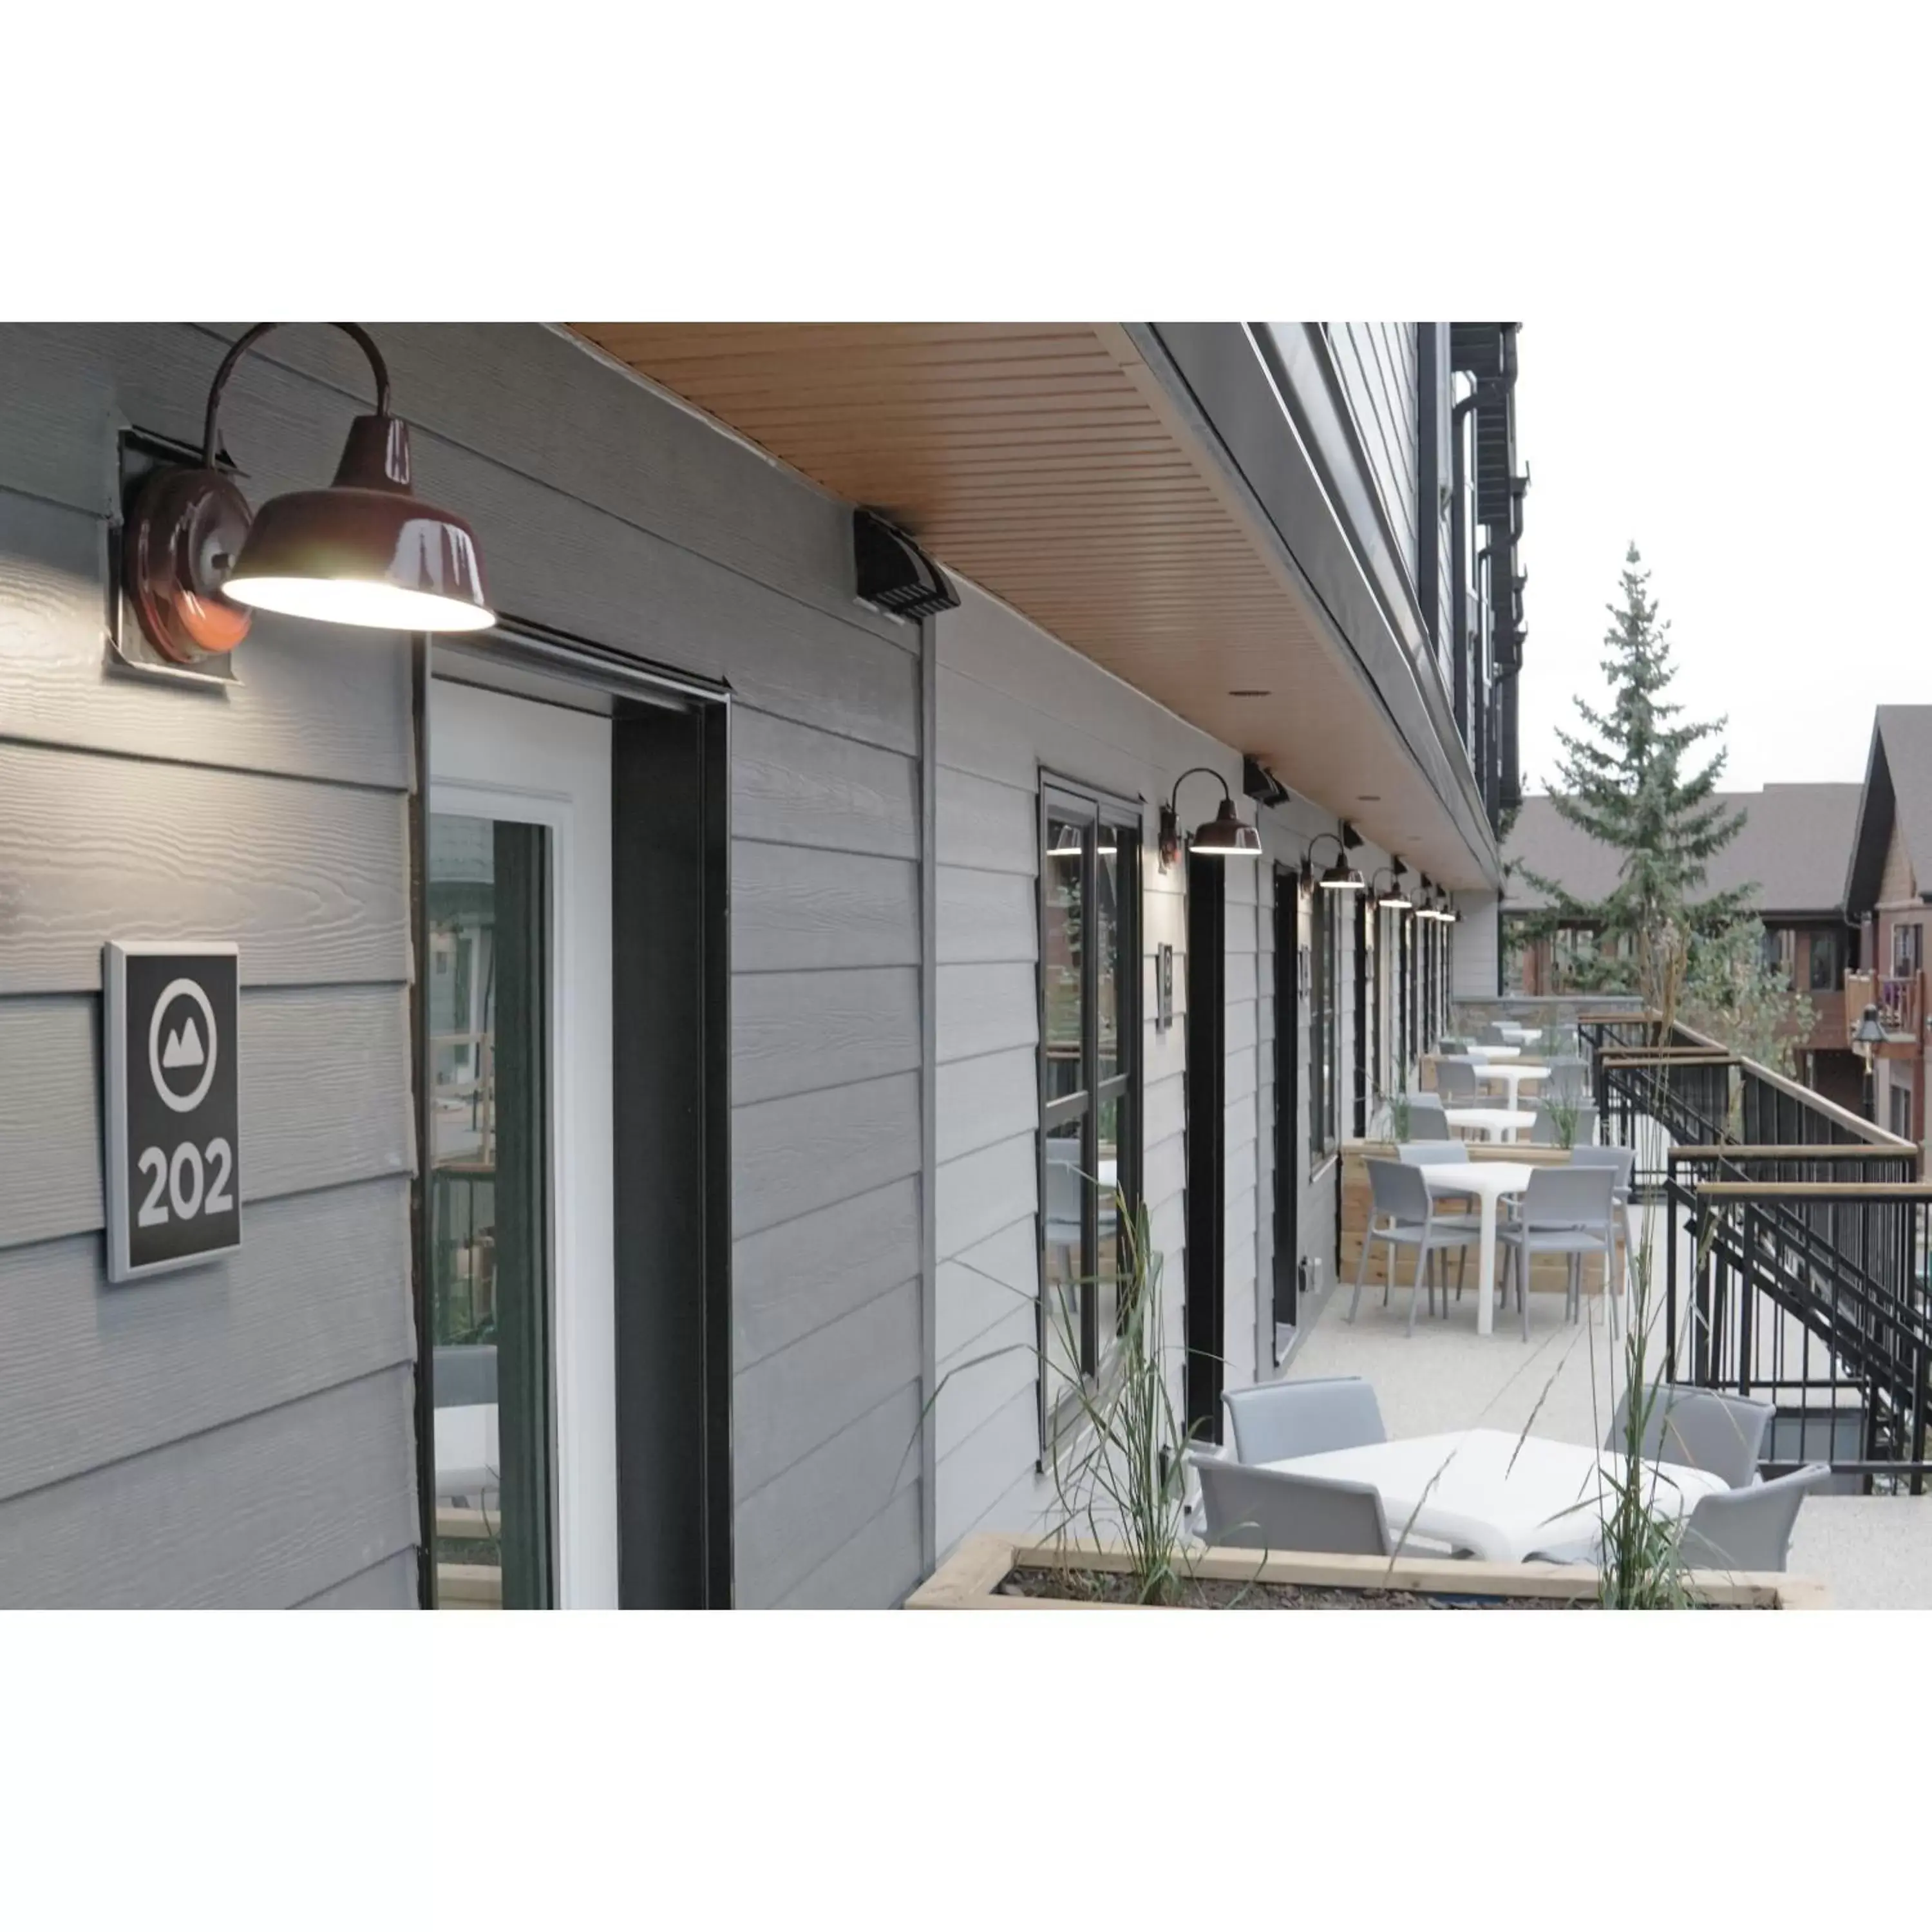 Property building in Basecamp Resorts Canmore